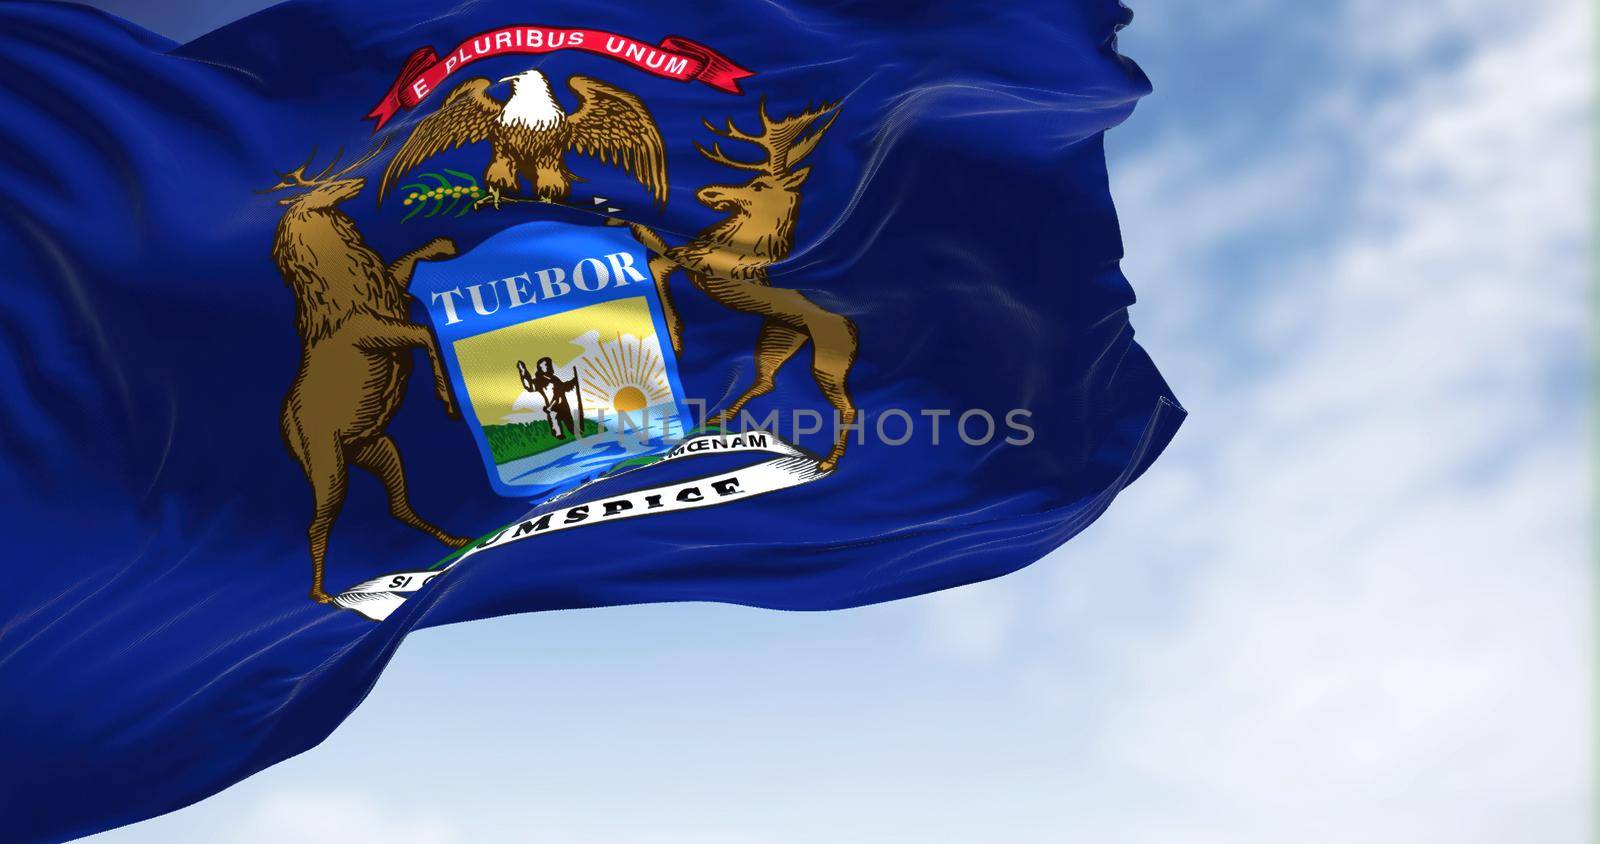 The US state flag of Michigan waving in the wind. MIchigan is a state in the Great Lakes region of the upper Midwestern United States. Democracy and independence.